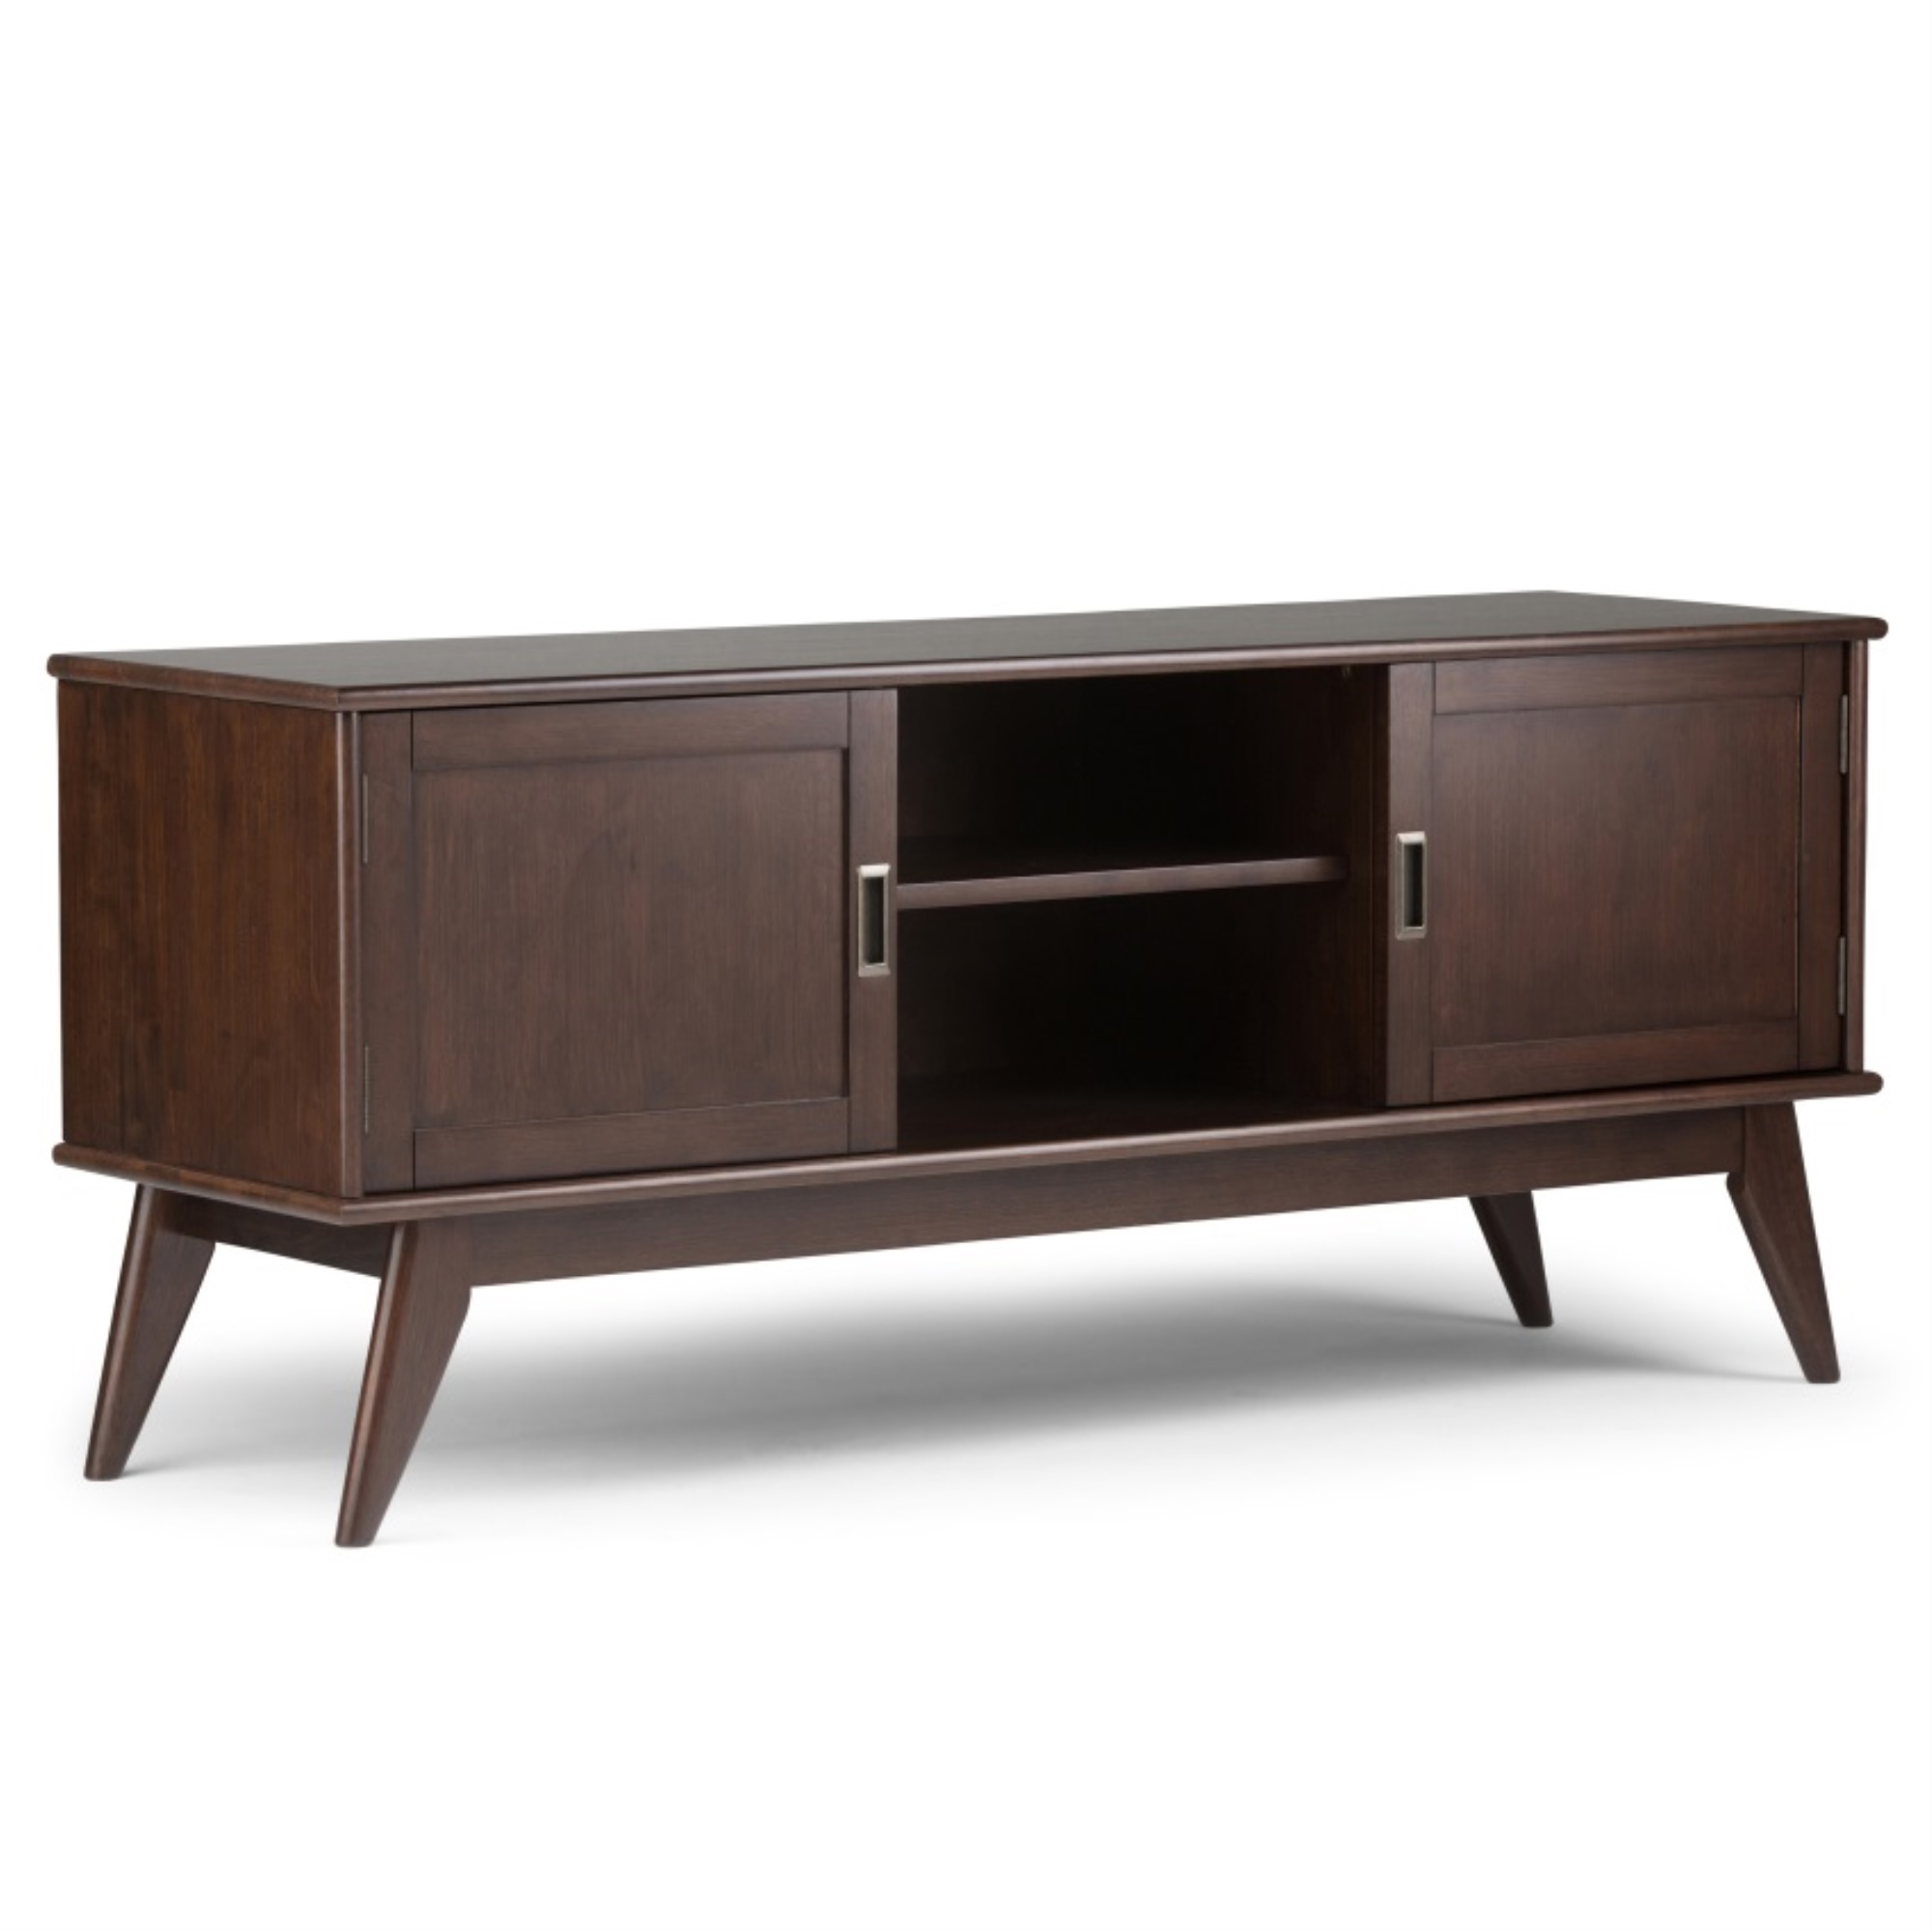 Simpli Home Draper SOLID HARDWOOD 60 inch Wide Mid-Century Modern TV Media Stand in Medium Auburn Brown For TVs up to 65 inches